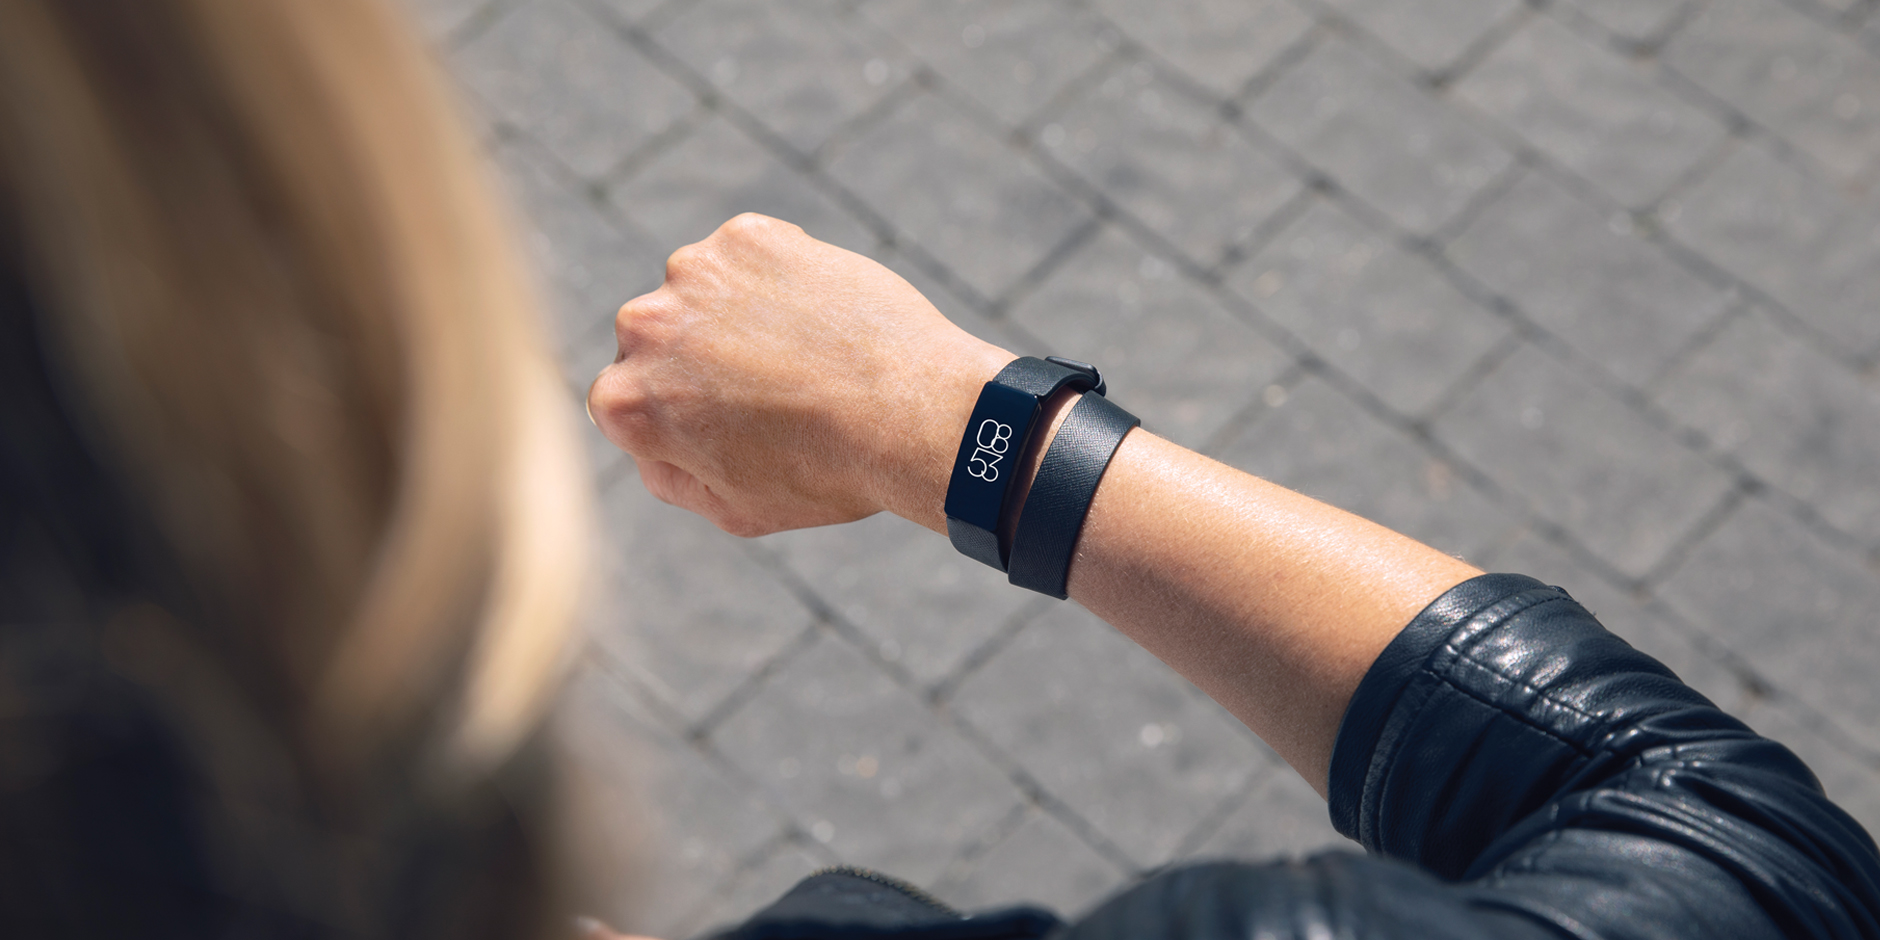 fitbit inspire 2 bands